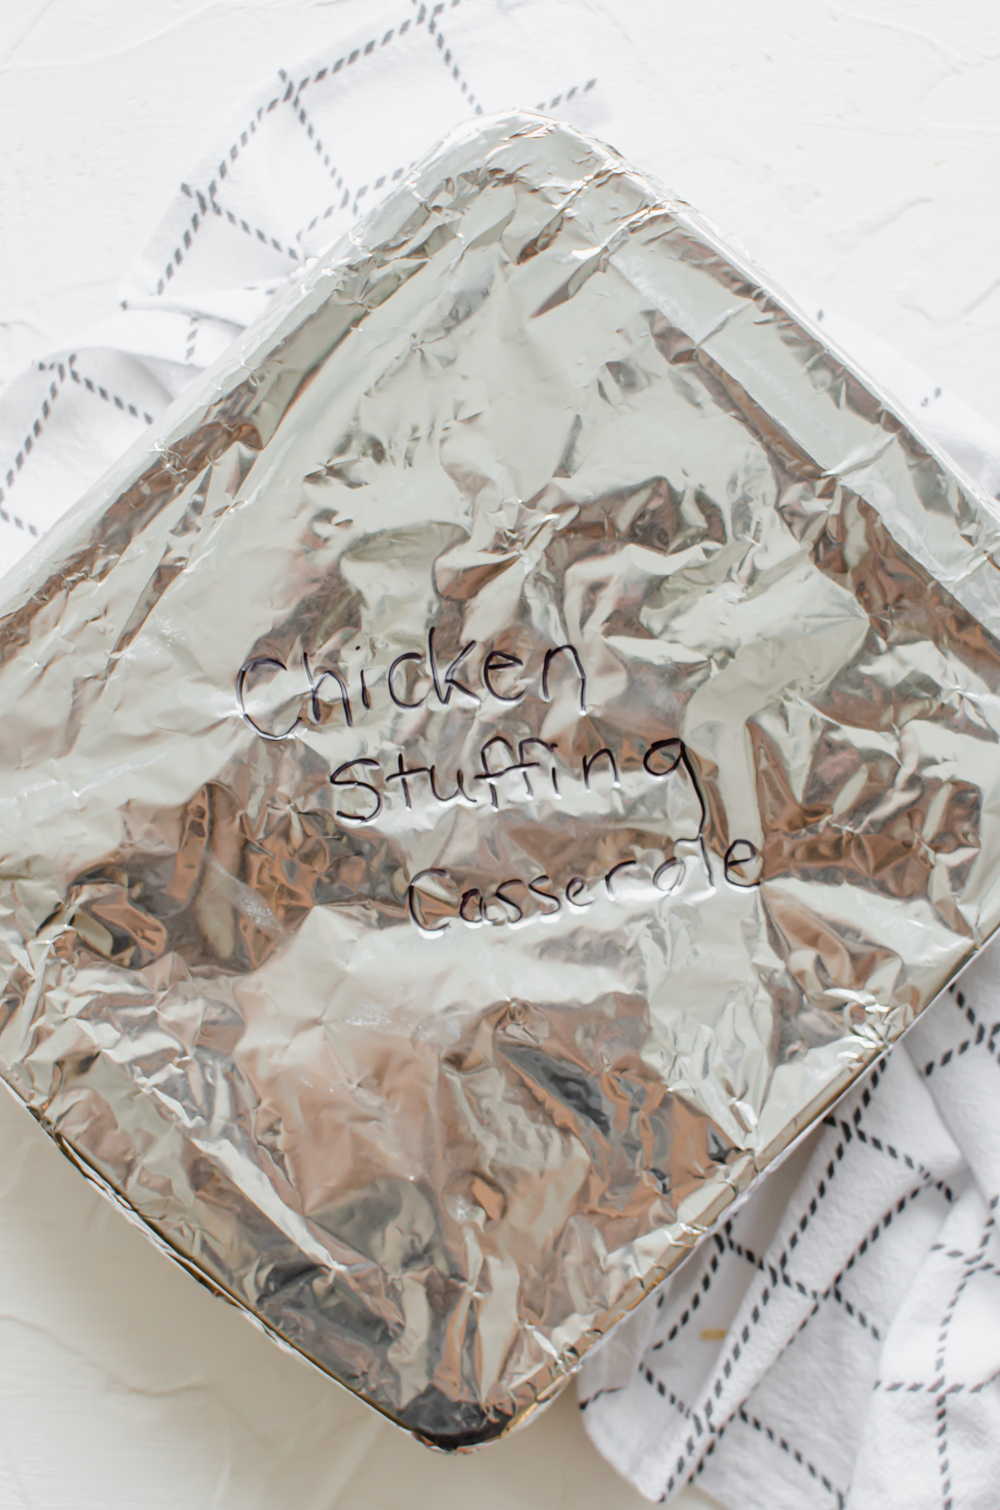 A square casserole dish covered in foil labeled chicken stuffing casserole.